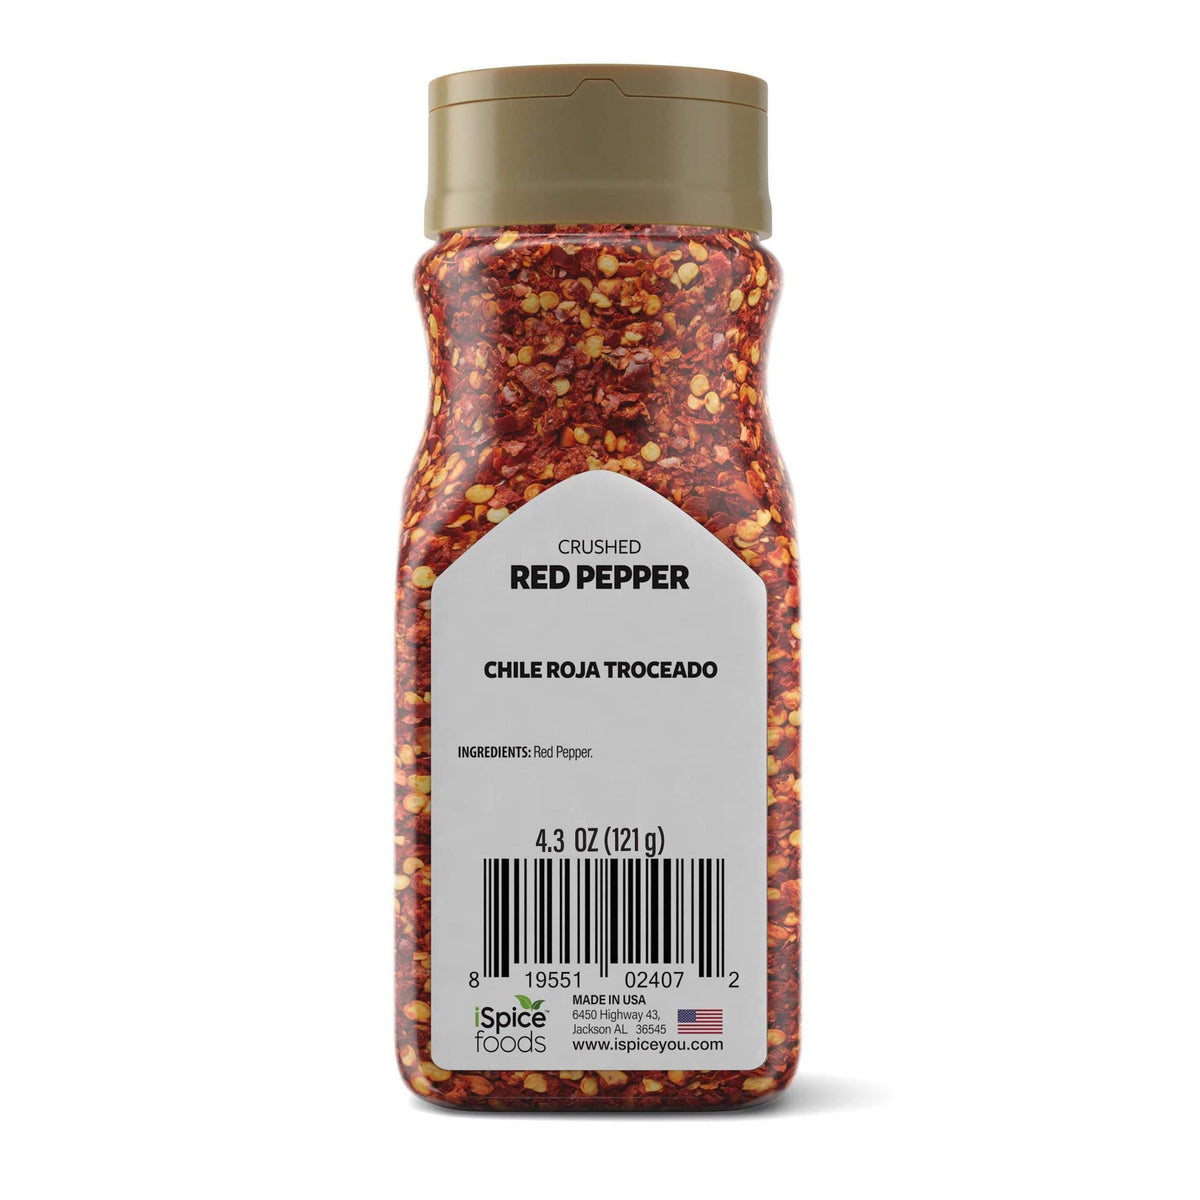 Explore The Flavourful Magic of Crushed Red Pepper